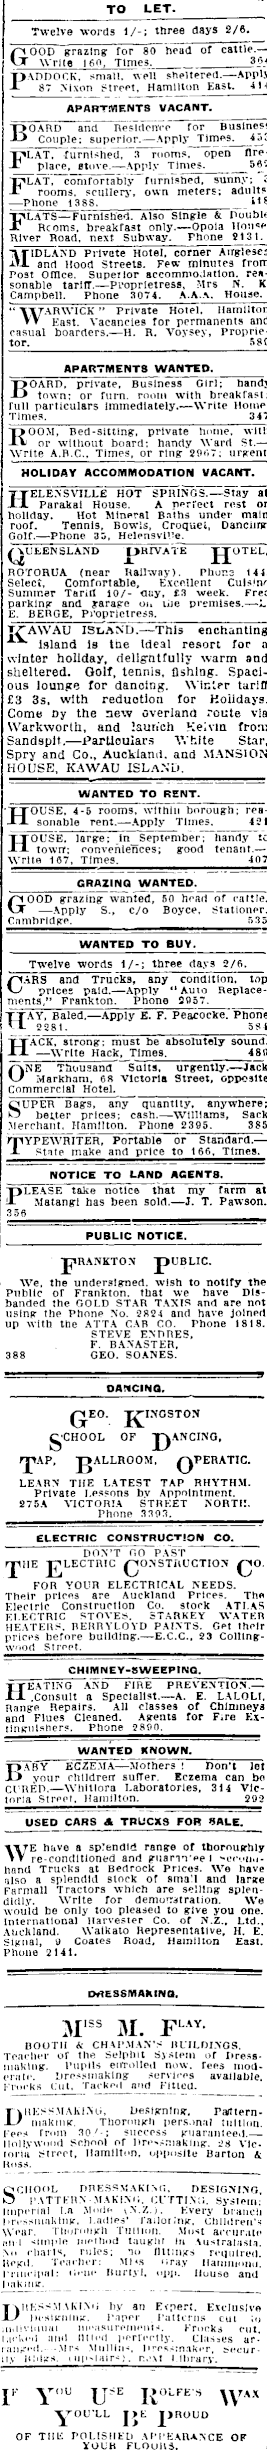 Papers Past Newspapers Waikato Times July 1936 Page 1 Advertisements Column 7